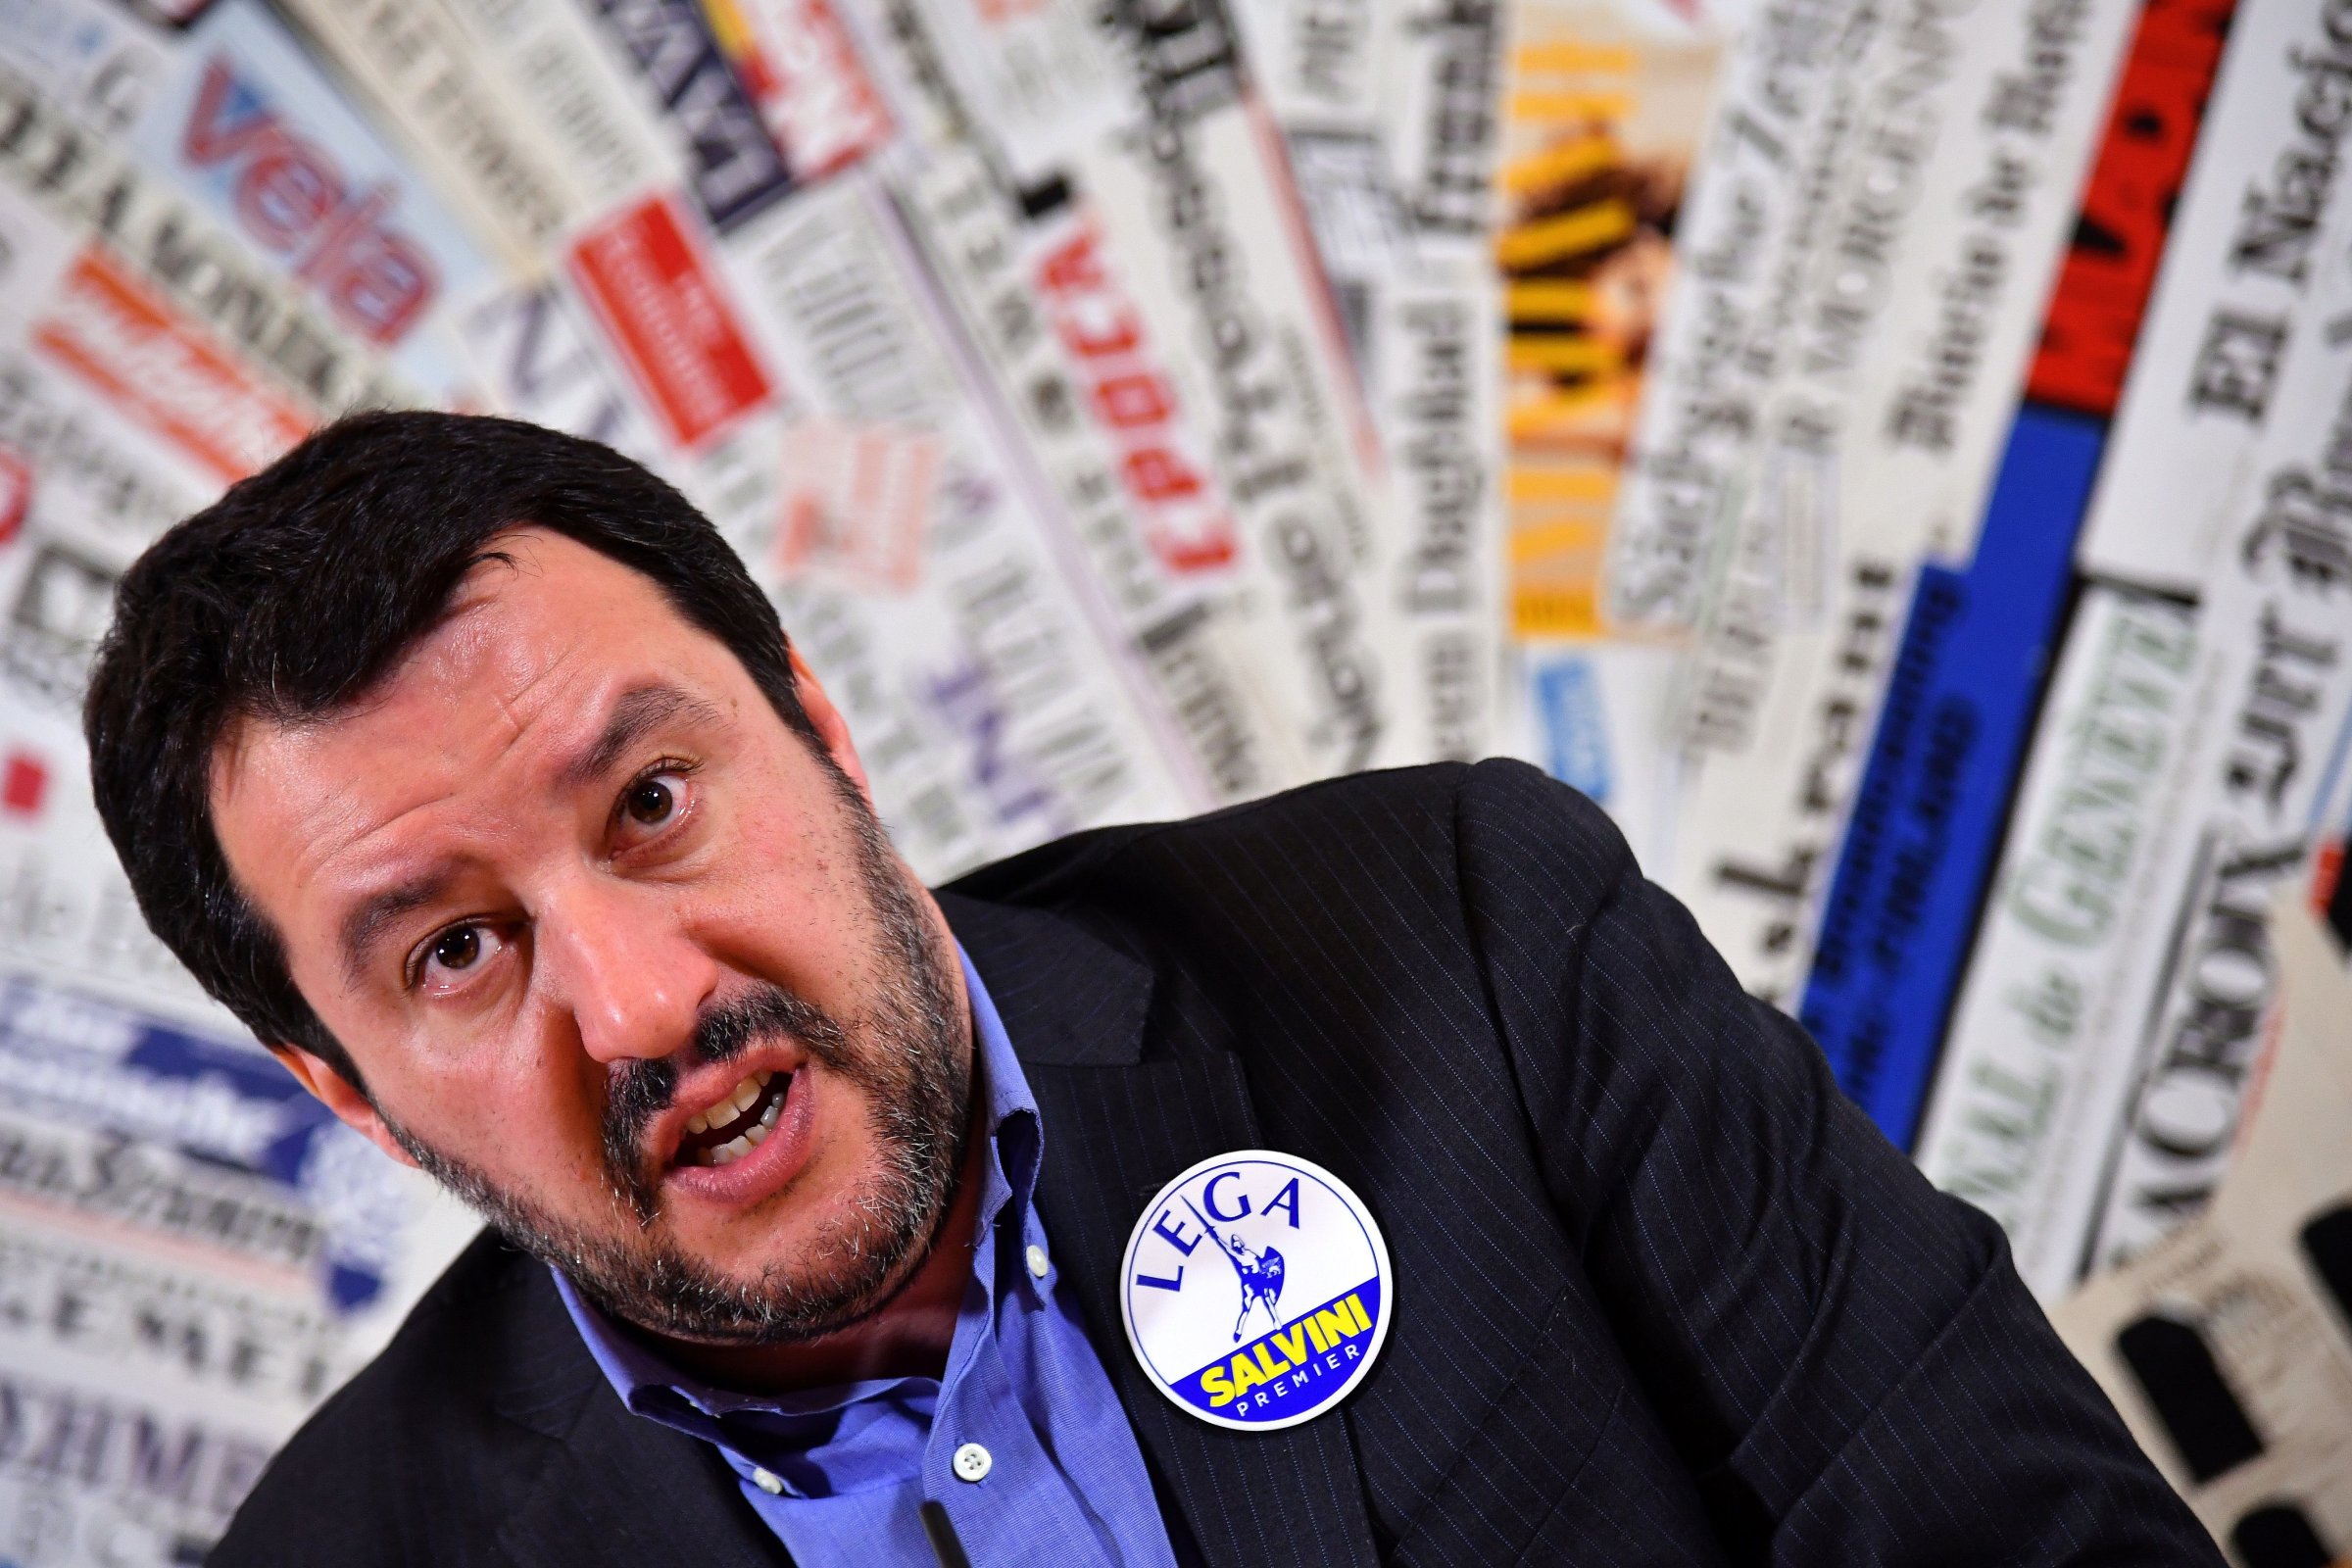 Italy's Lega Nord party (Northern League) Matteo Salvini answers questions at the Foreign Press Association in Rome on February 22, 2018.